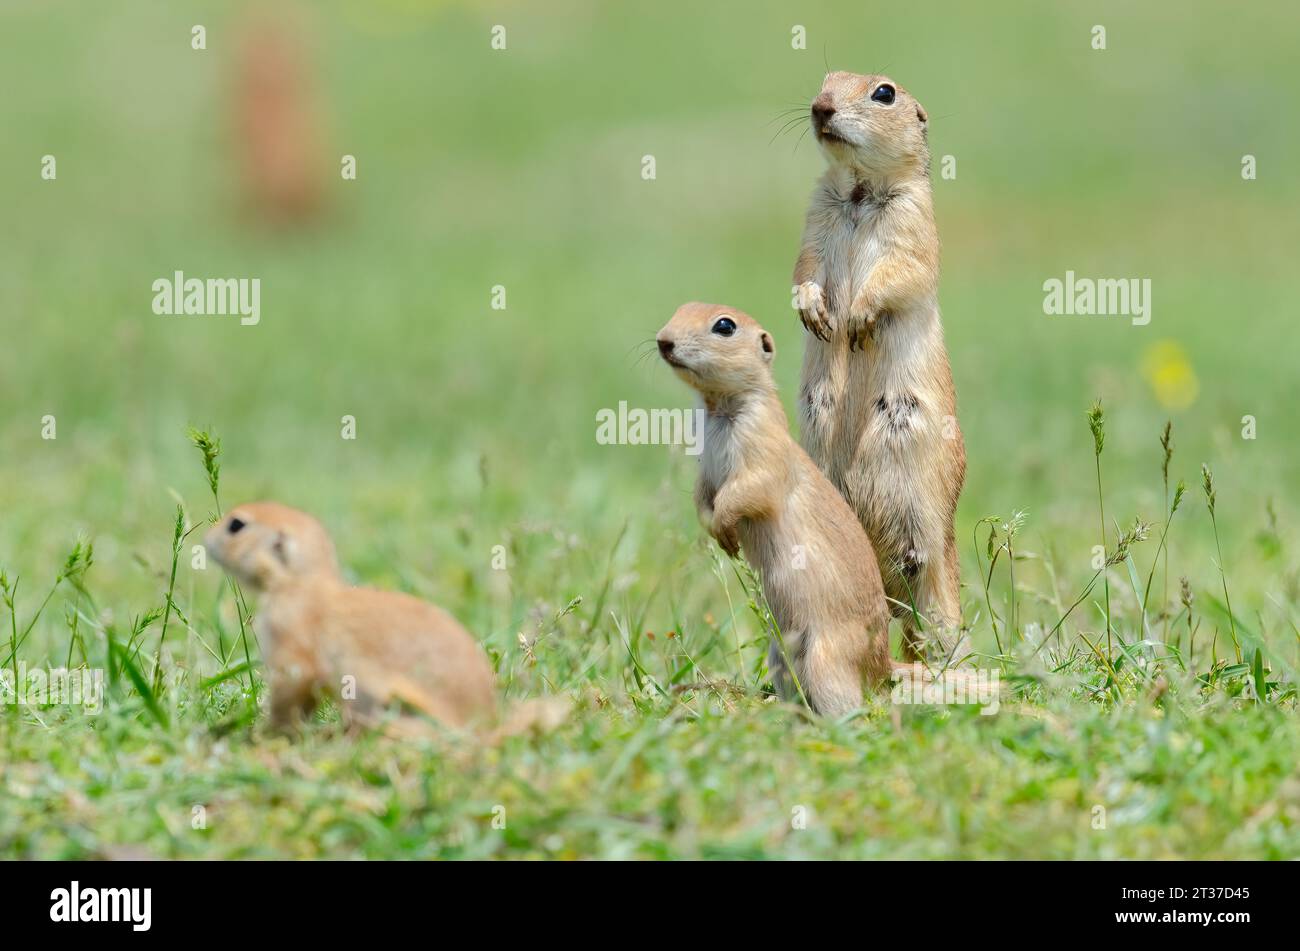 Ground squirrel family. Cute funny animal ground squirrel. Green nature background. Stock Photo